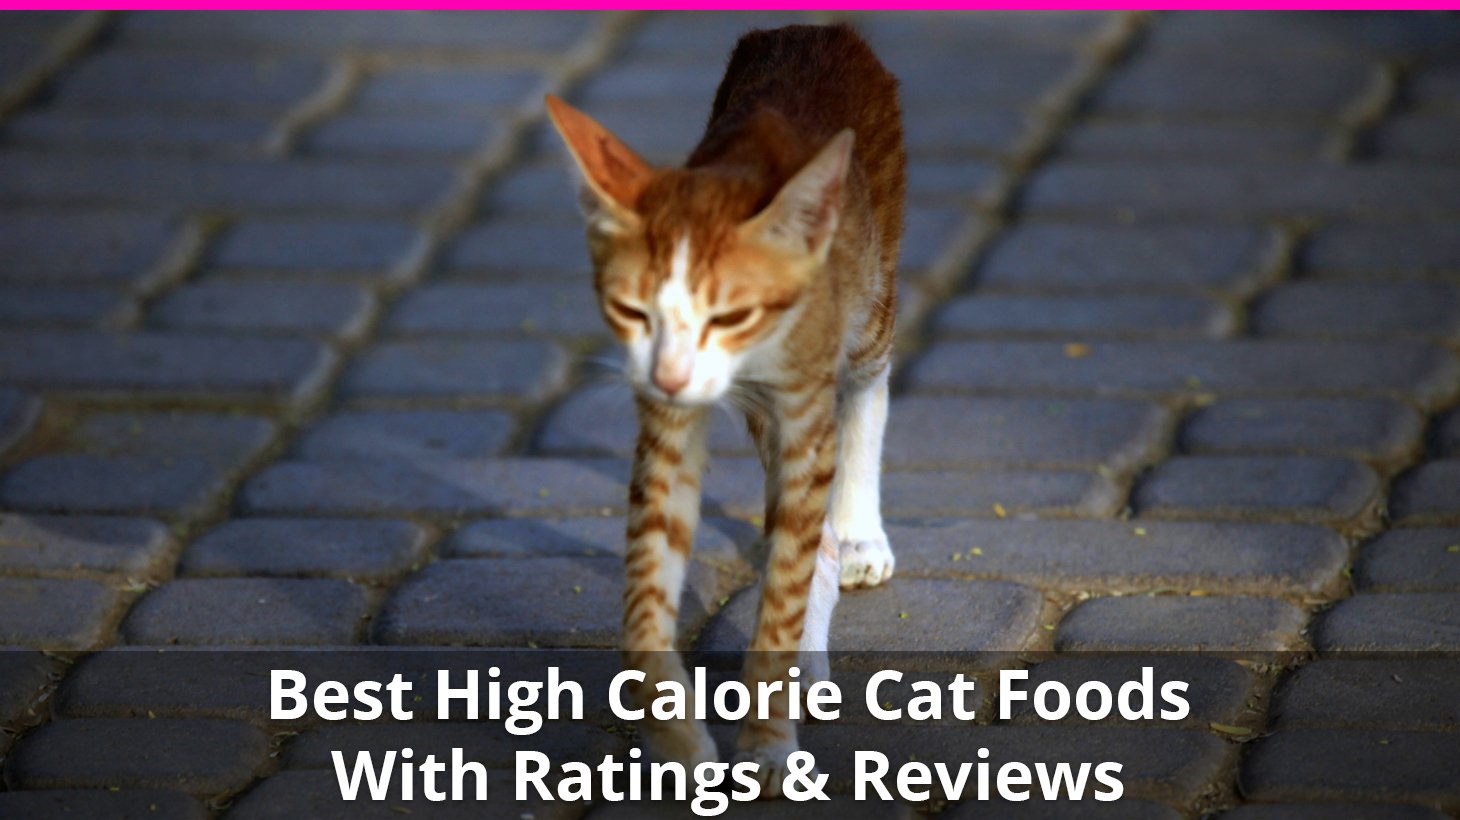 wet cat food for weight gain